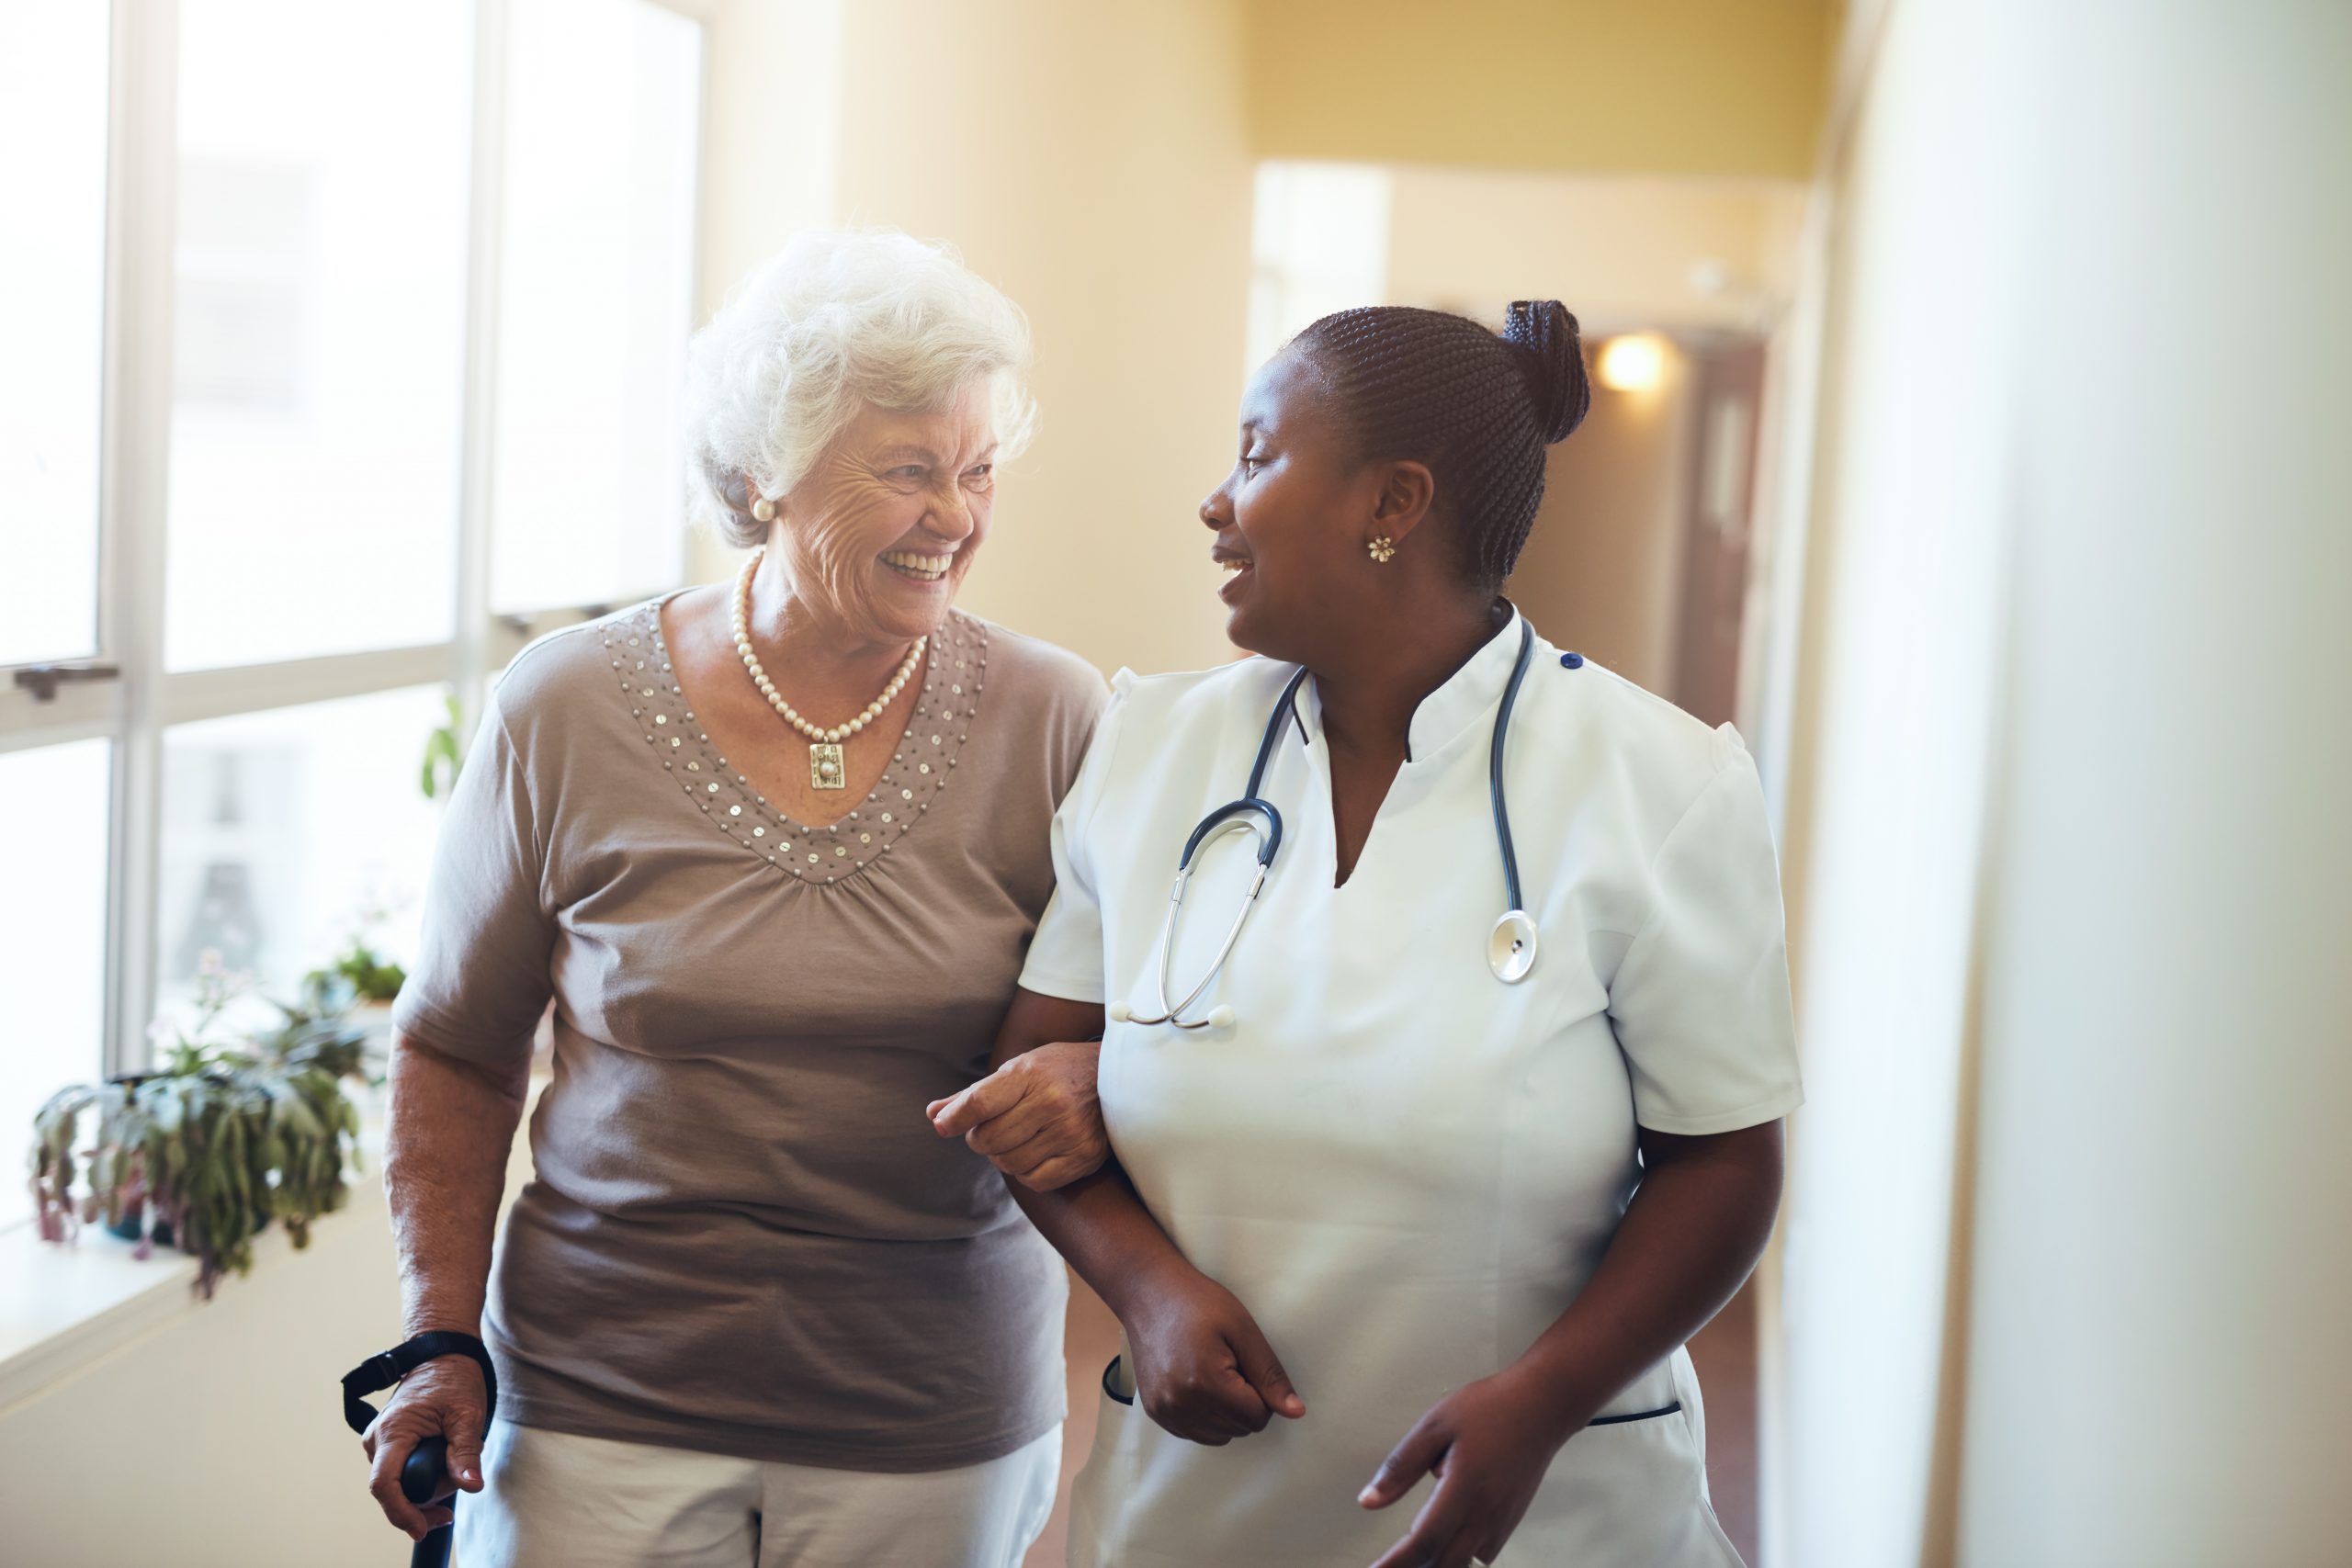 Image of an elderly woman and a nurse, walking together, smiling at each other